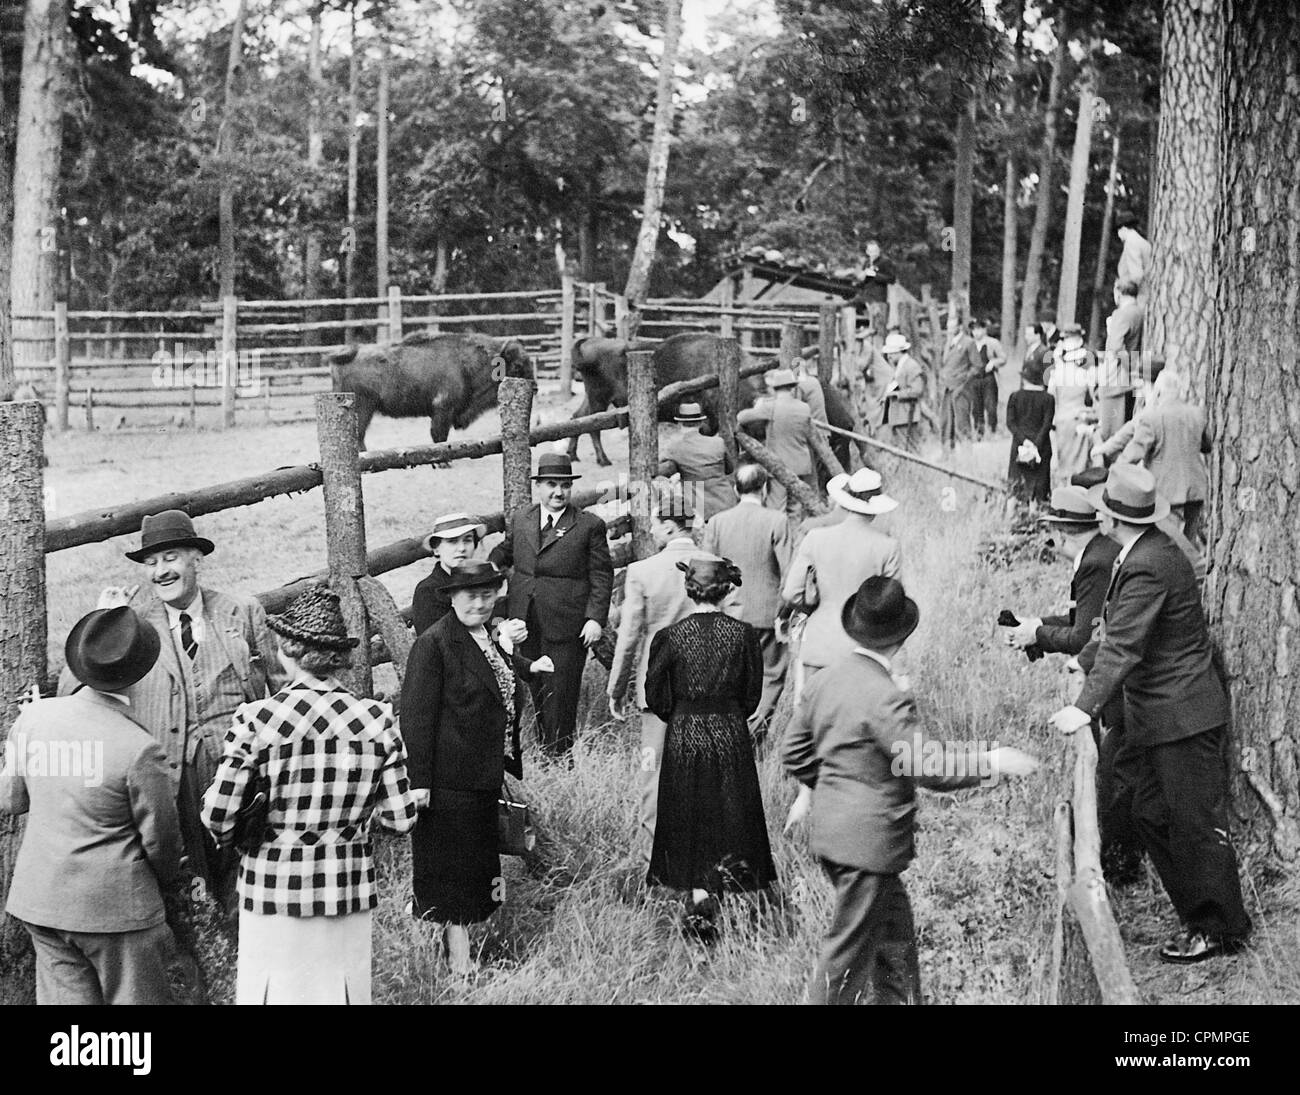 Participants in a conference visit the bison in Karinhall, 1938 Stock Photo